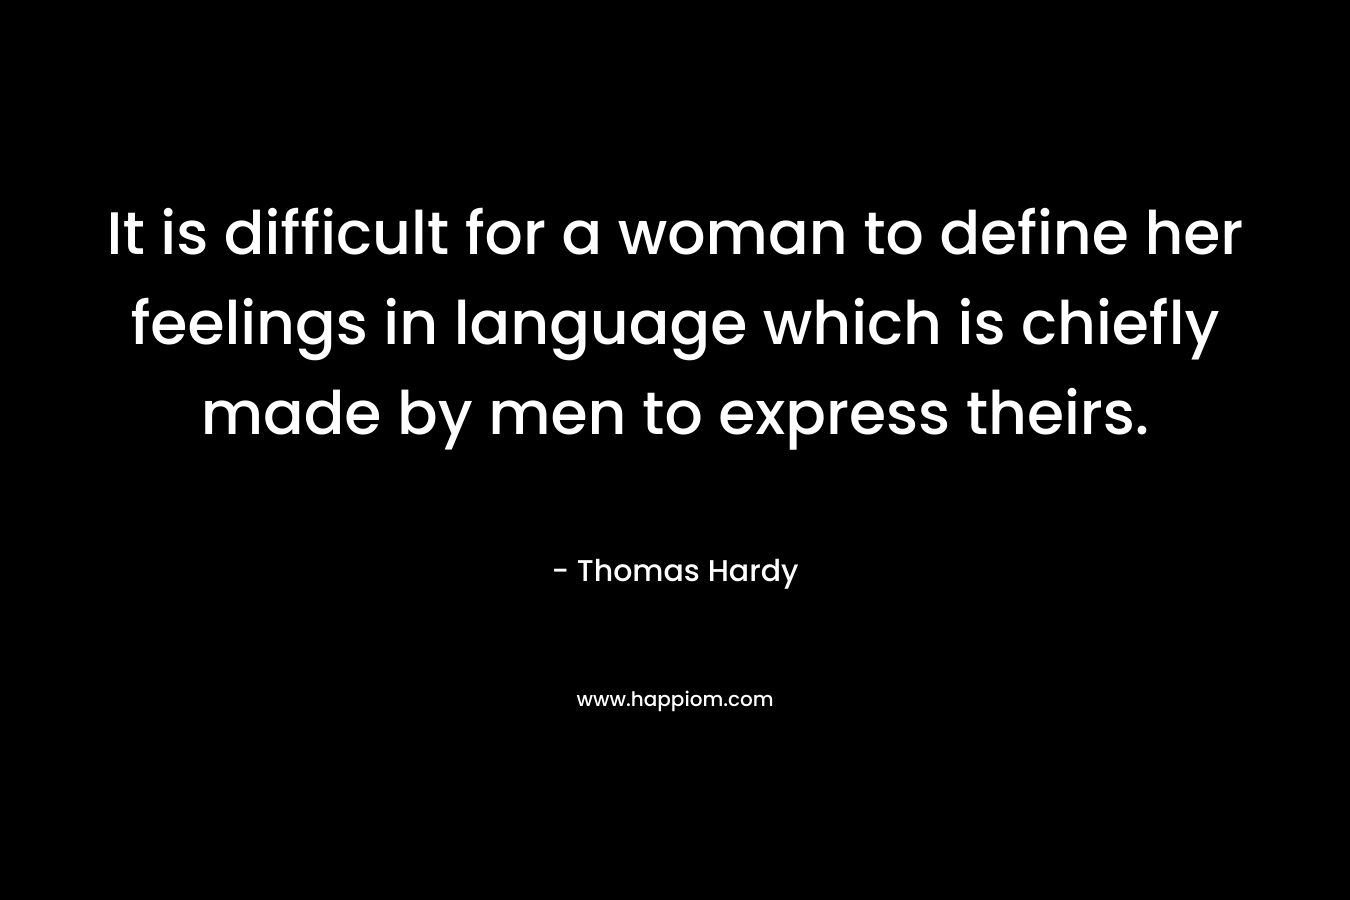 It is difficult for a woman to define her feelings in language which is chiefly made by men to express theirs.